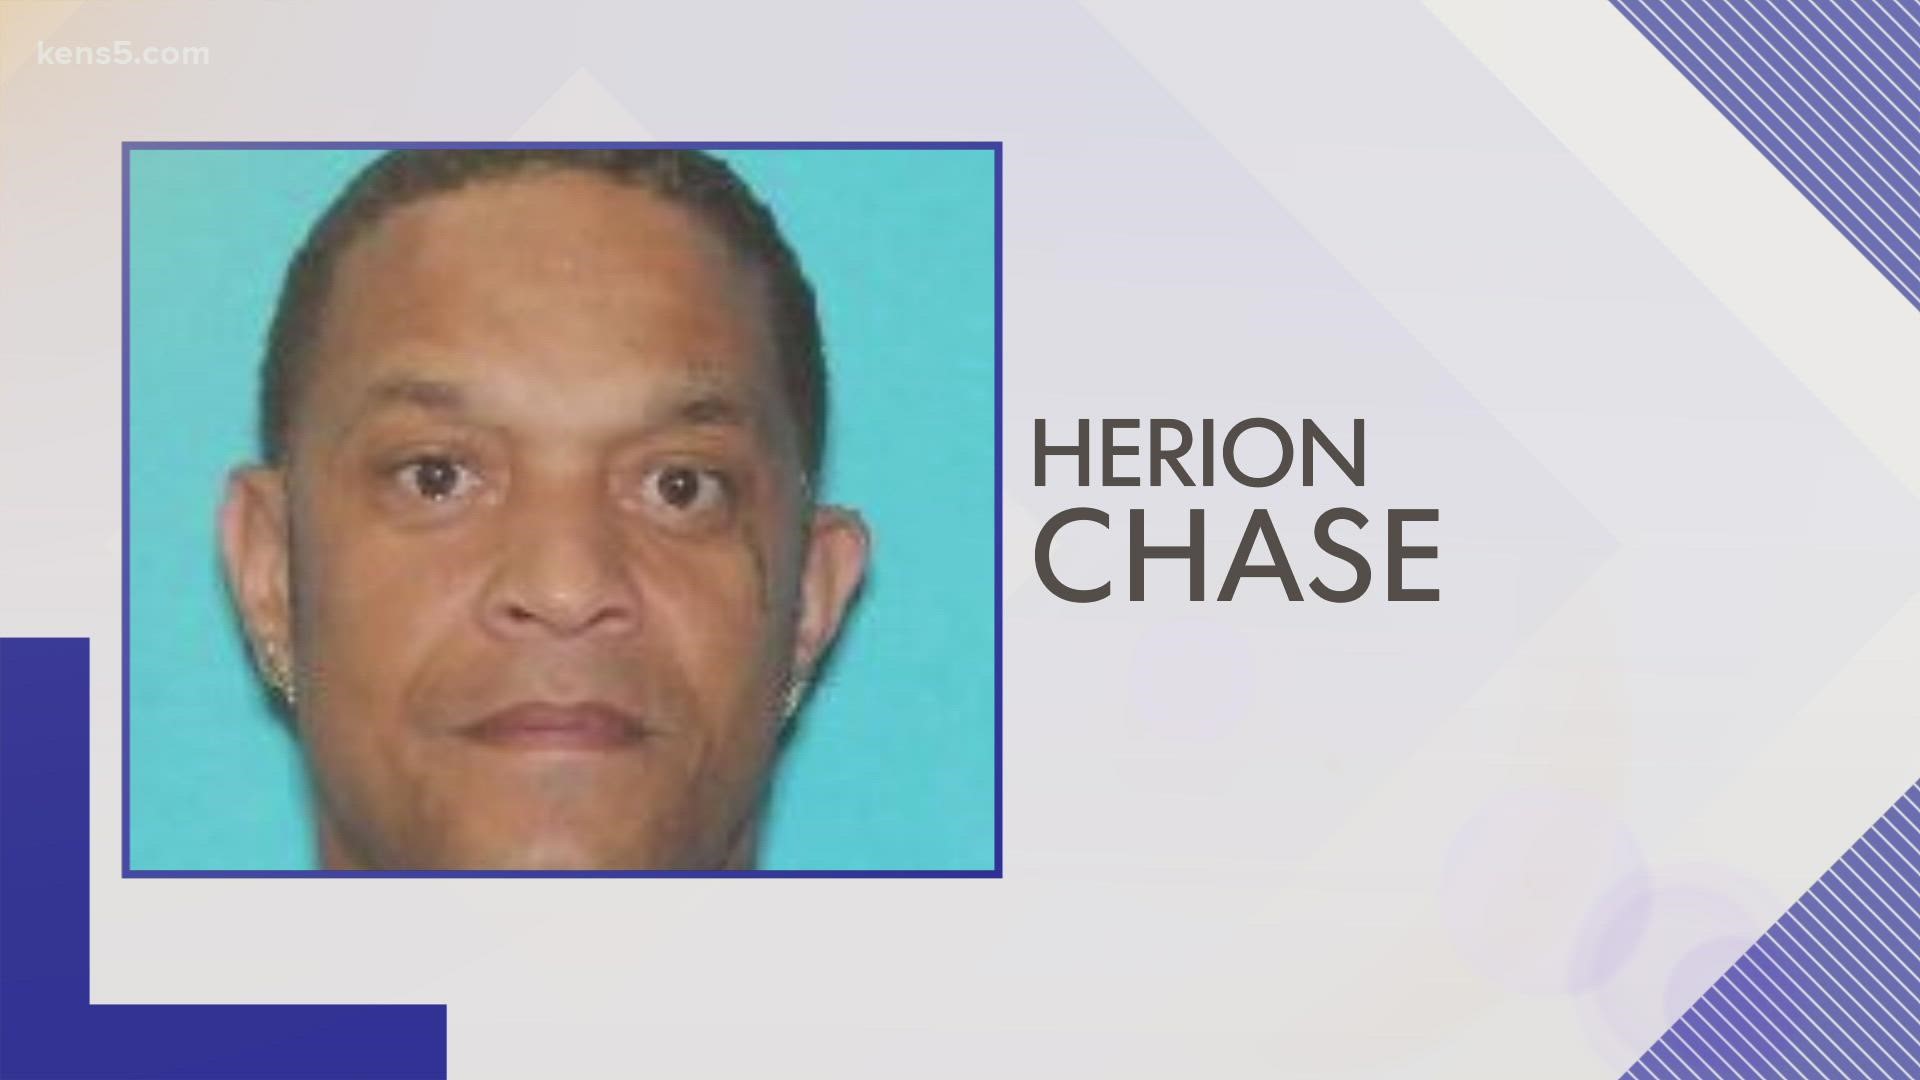 On September 8, 2018, Herion Chase was standing in the parking lot of the Big Cassel's Smokehouse along on I-10 when someone across the street opened fire.